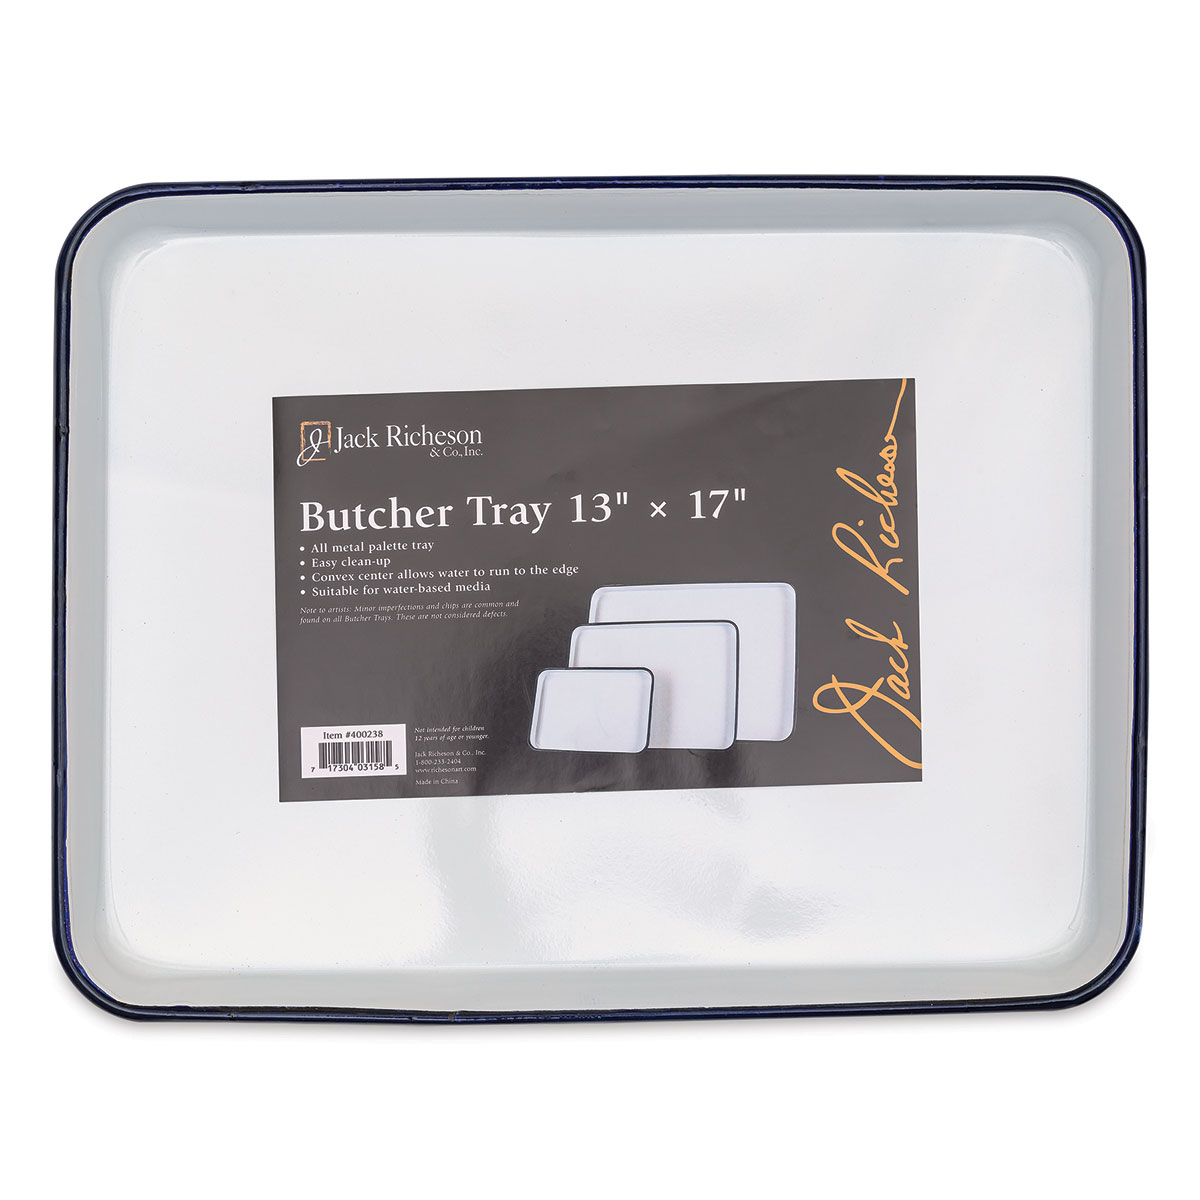 Jack Richeson Butcher Tray 13in. x 17in. White